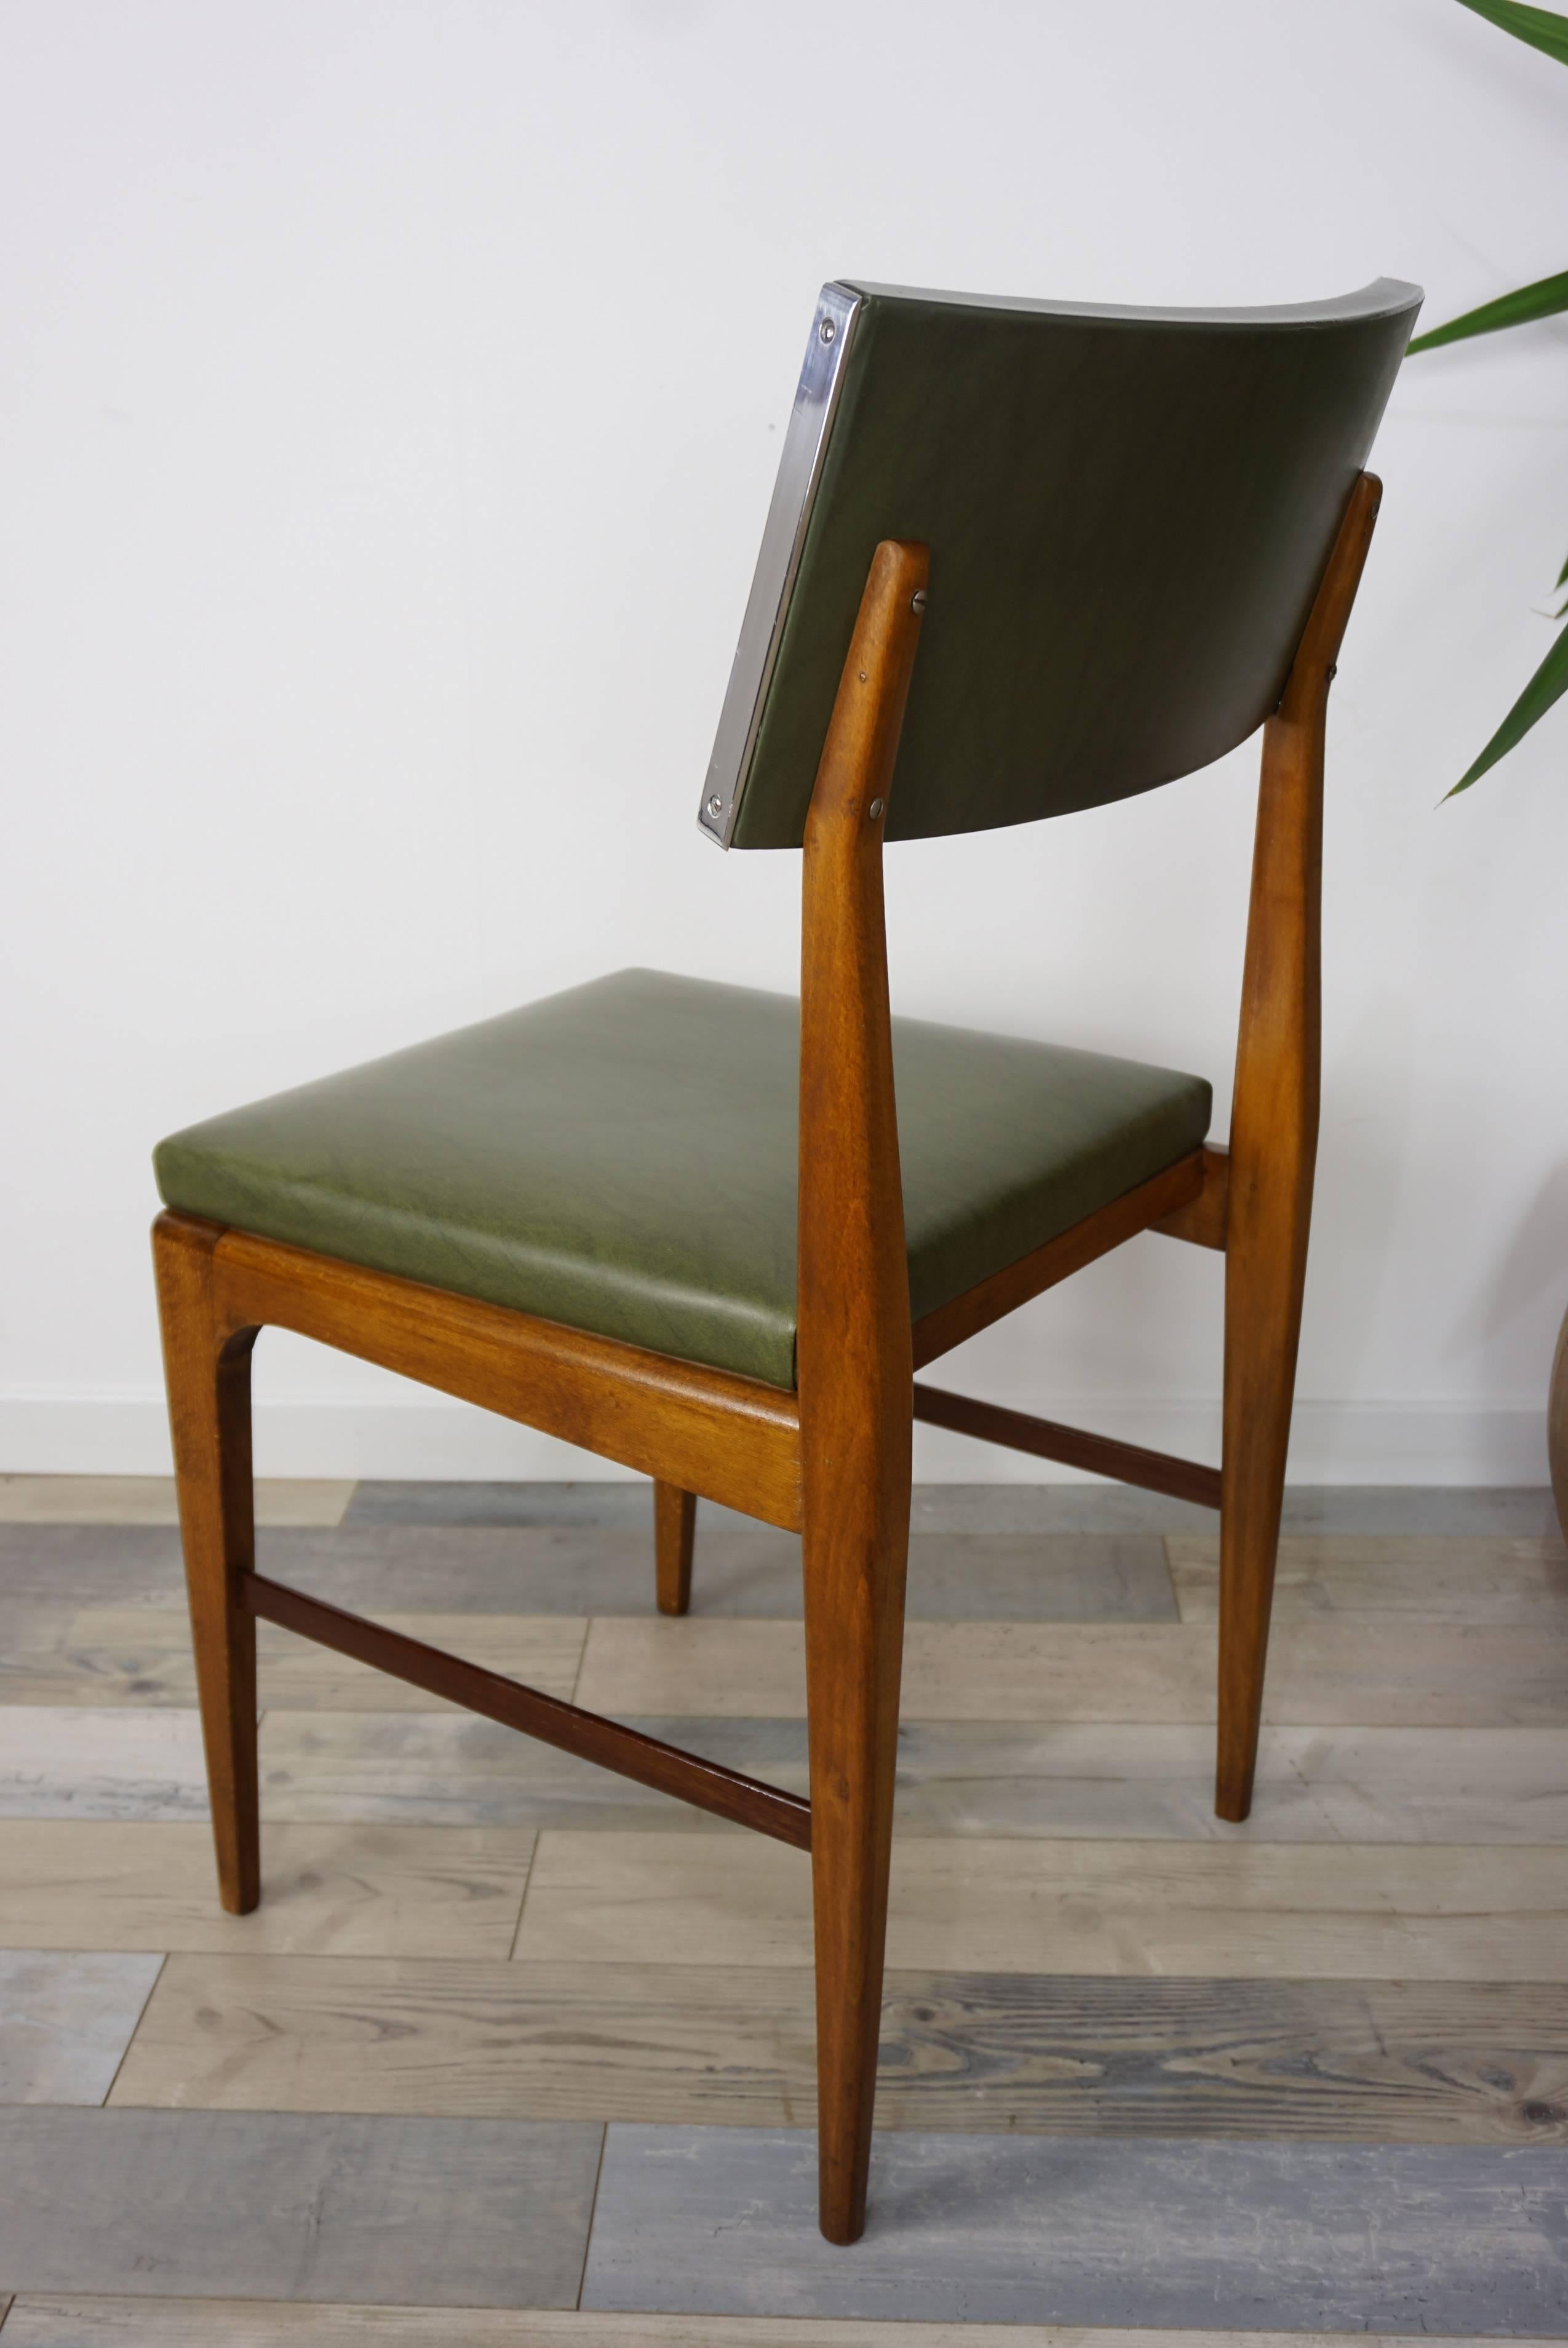 Wooden Teak and Green Faux Leather Scandinavian Style Dutch Design Chair 3